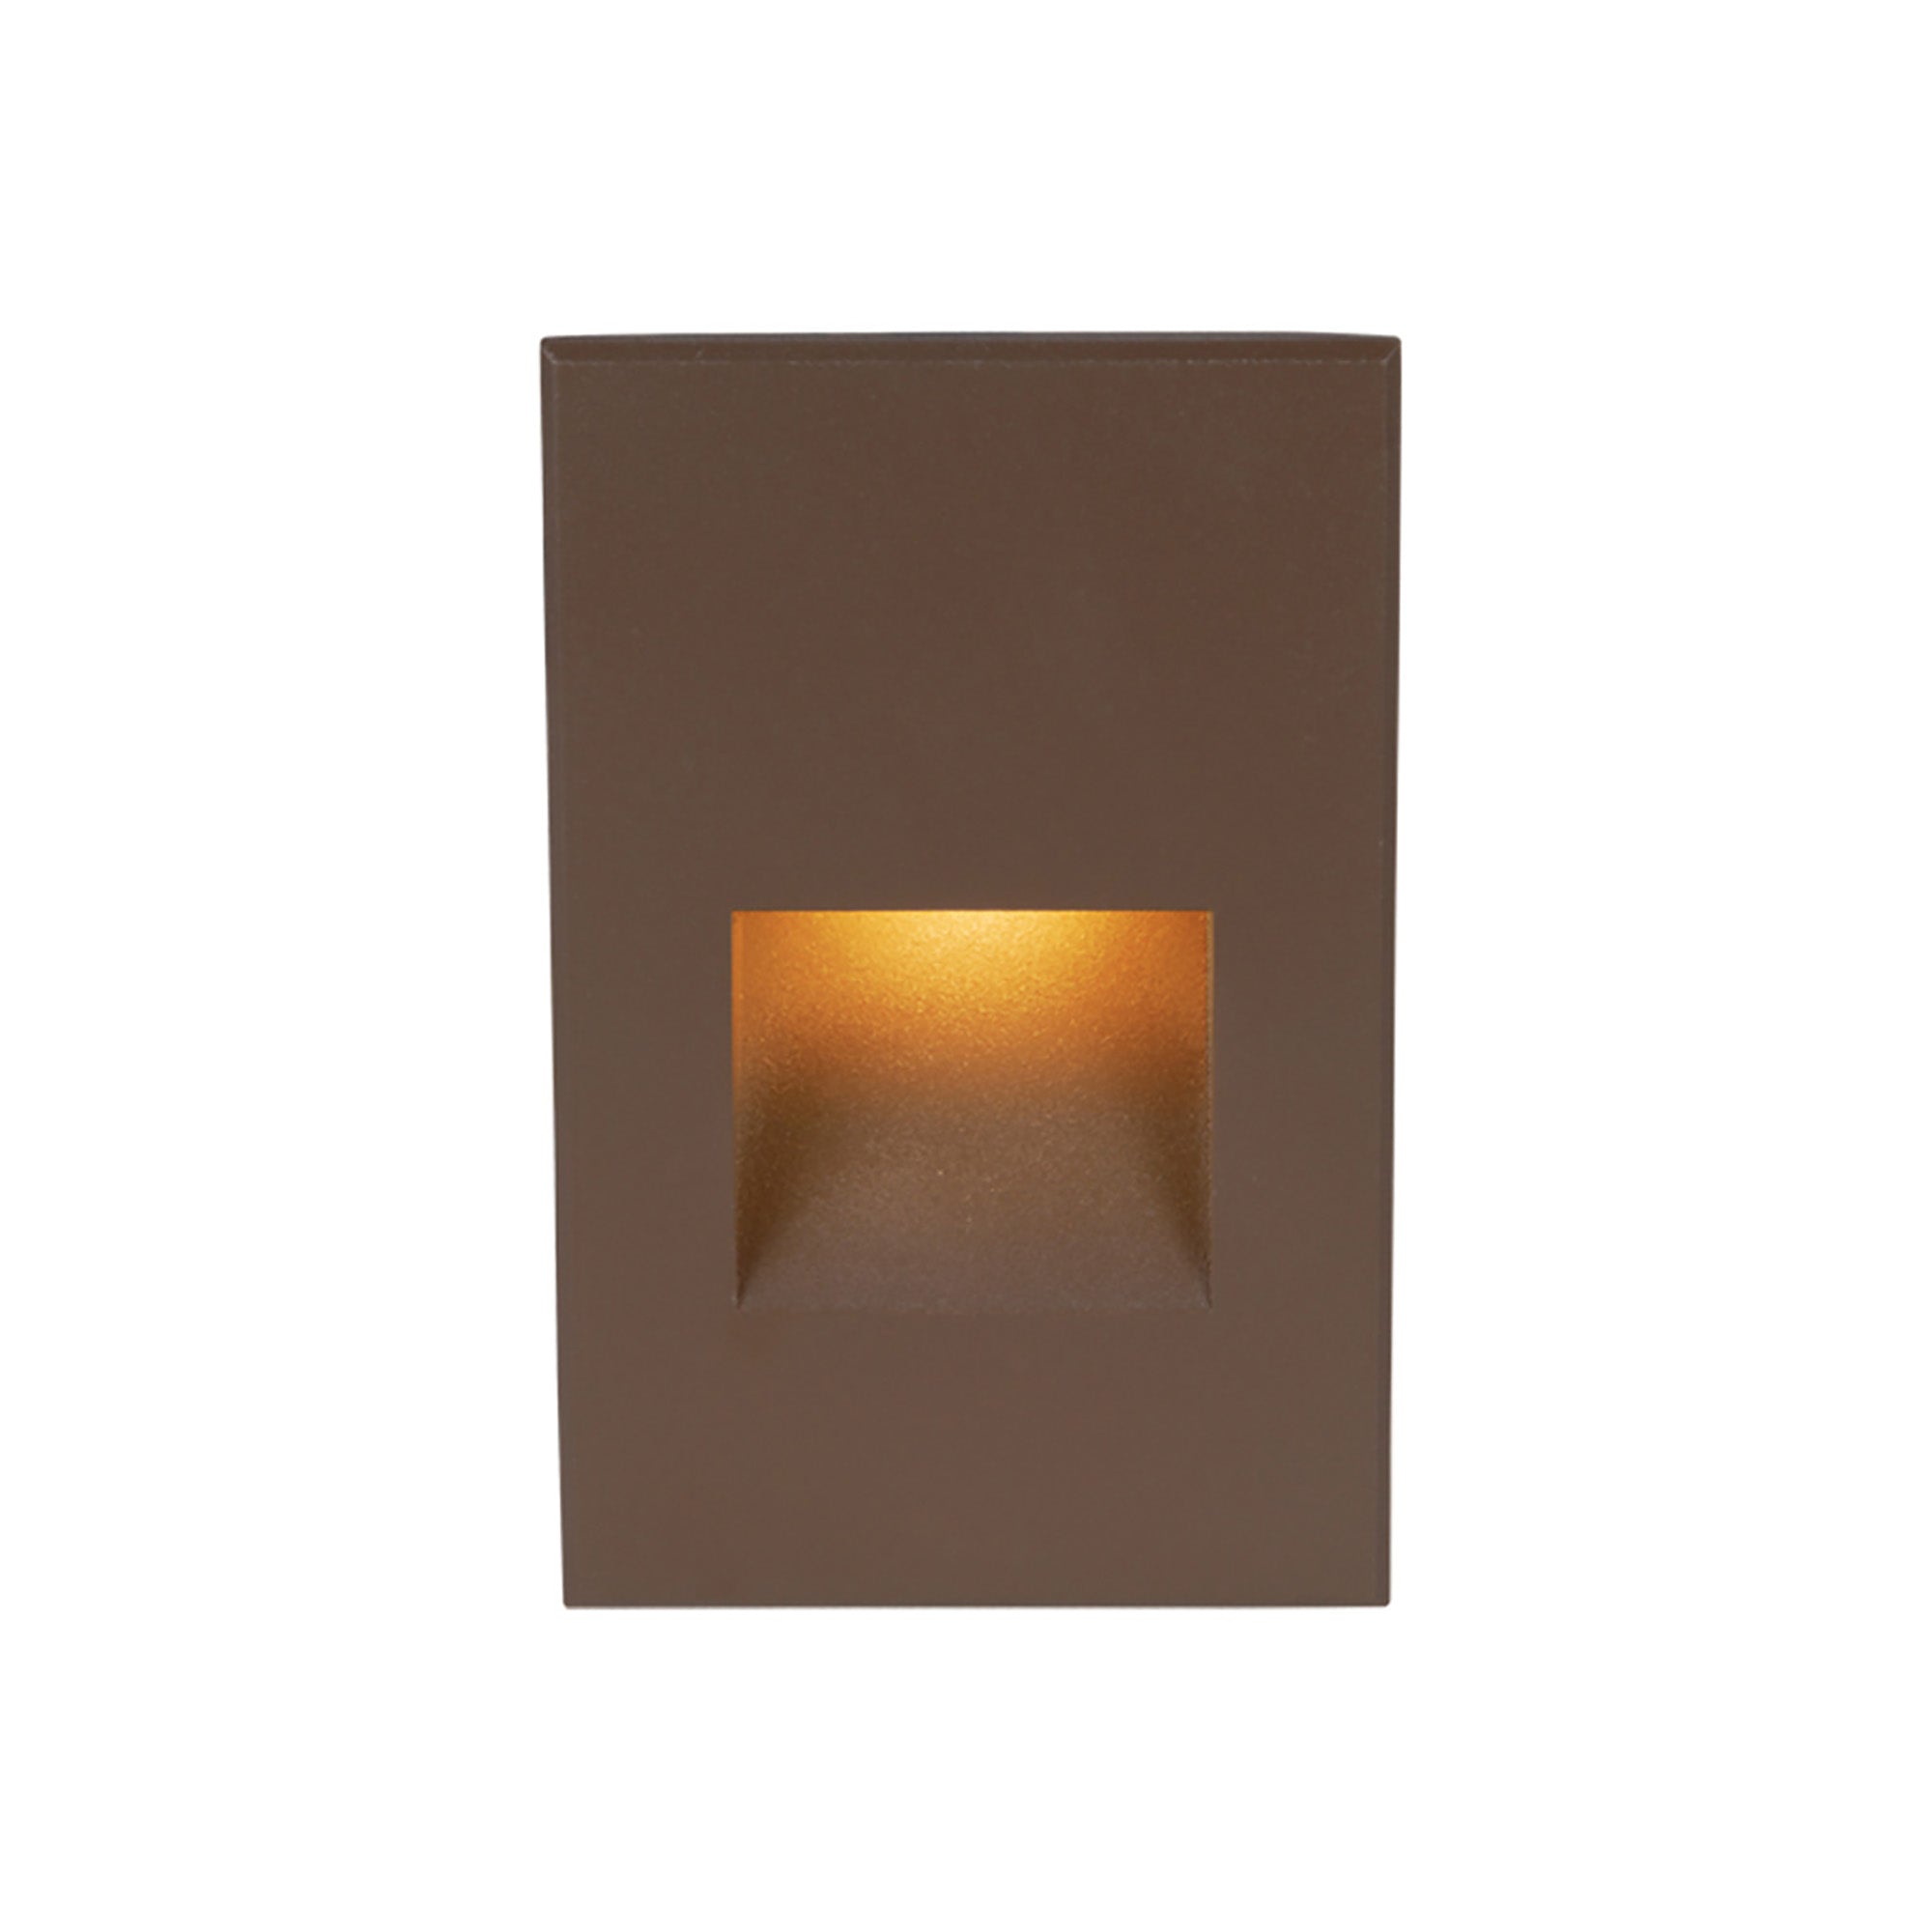 LED 12V Vertical Indoor/Outdoor Step and Wall Light